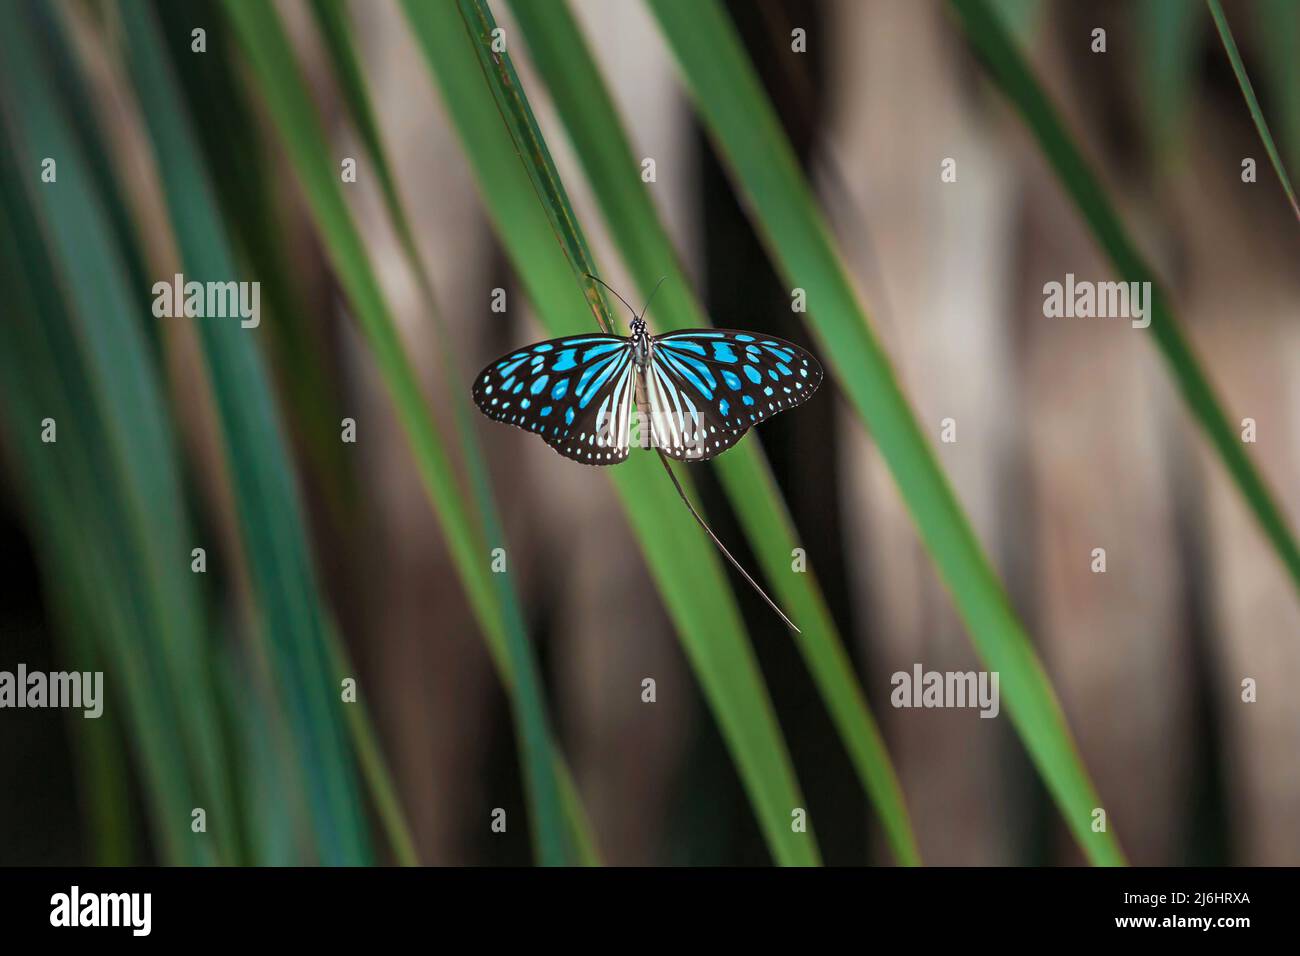 Unidentified butterfly sunbathing on palm leaves in sunlight, bright blue wings against green leaves, and mangrove forest blurred in the background. Stock Photo